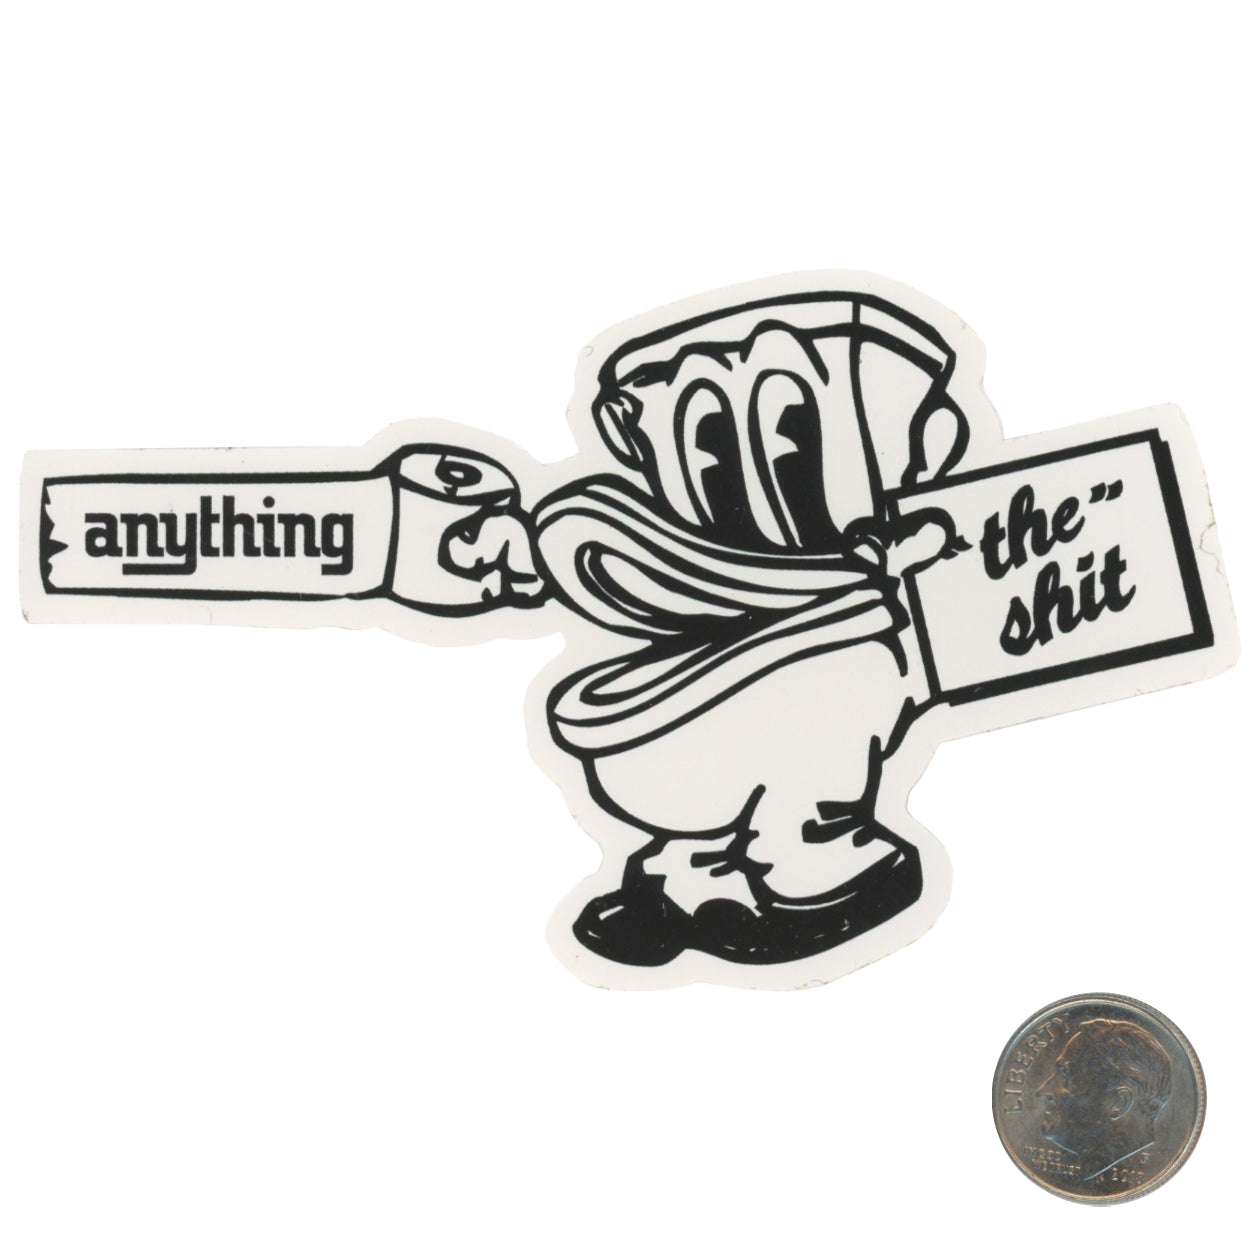 A NY Thing The Shit Toilet Character Sticker with dime